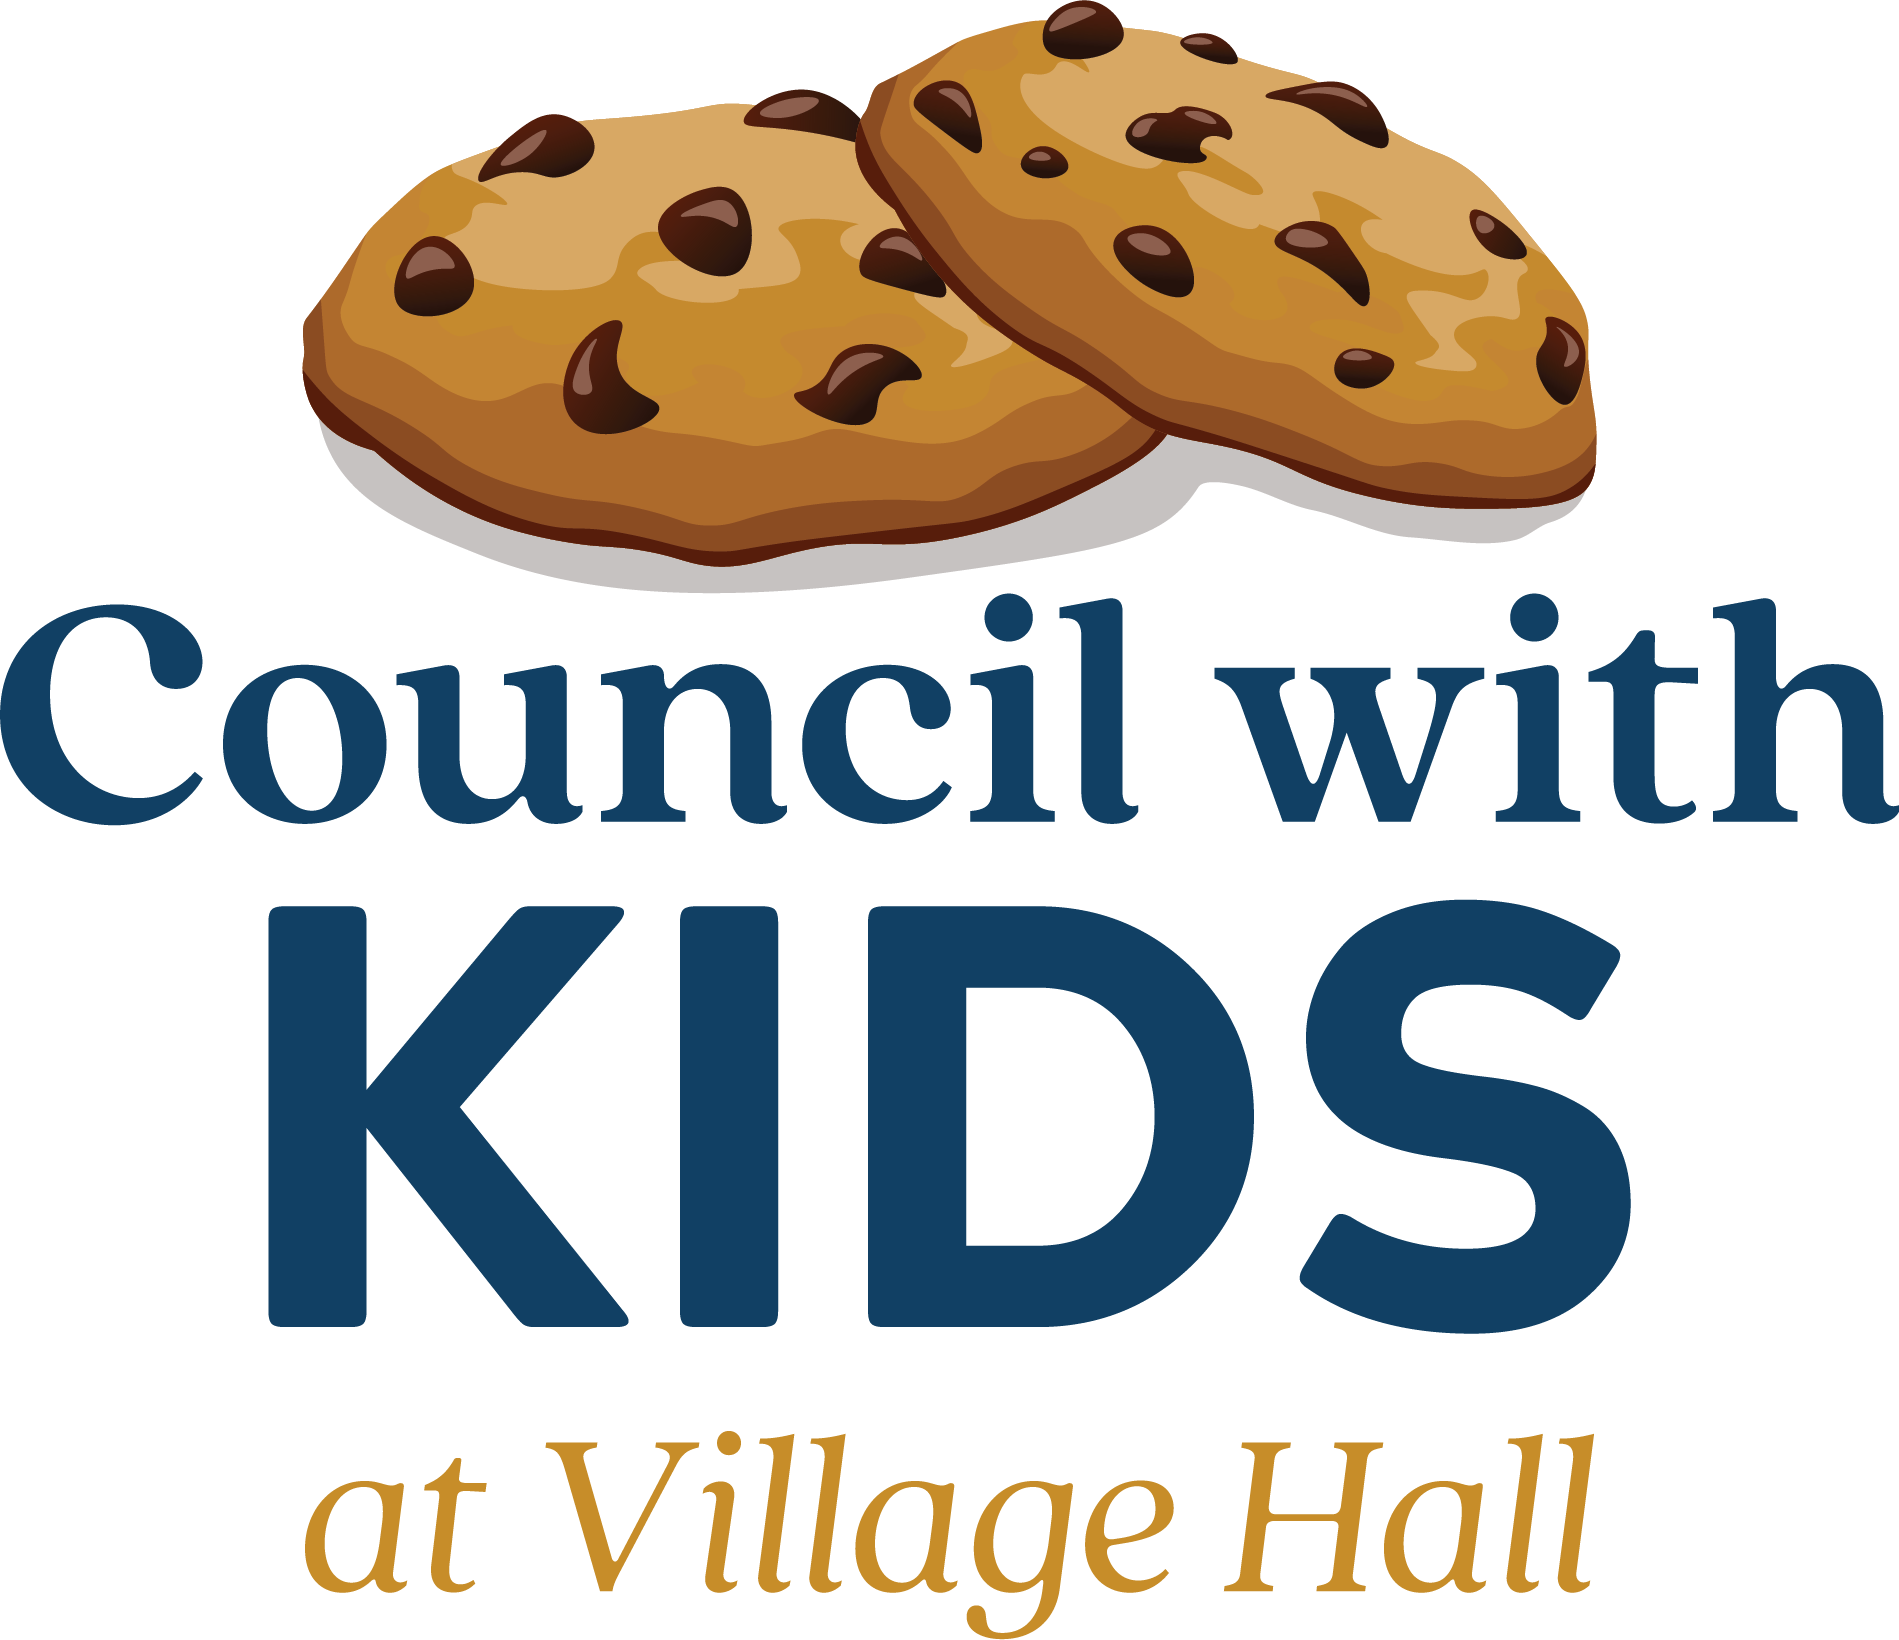 Council with Kids Logo